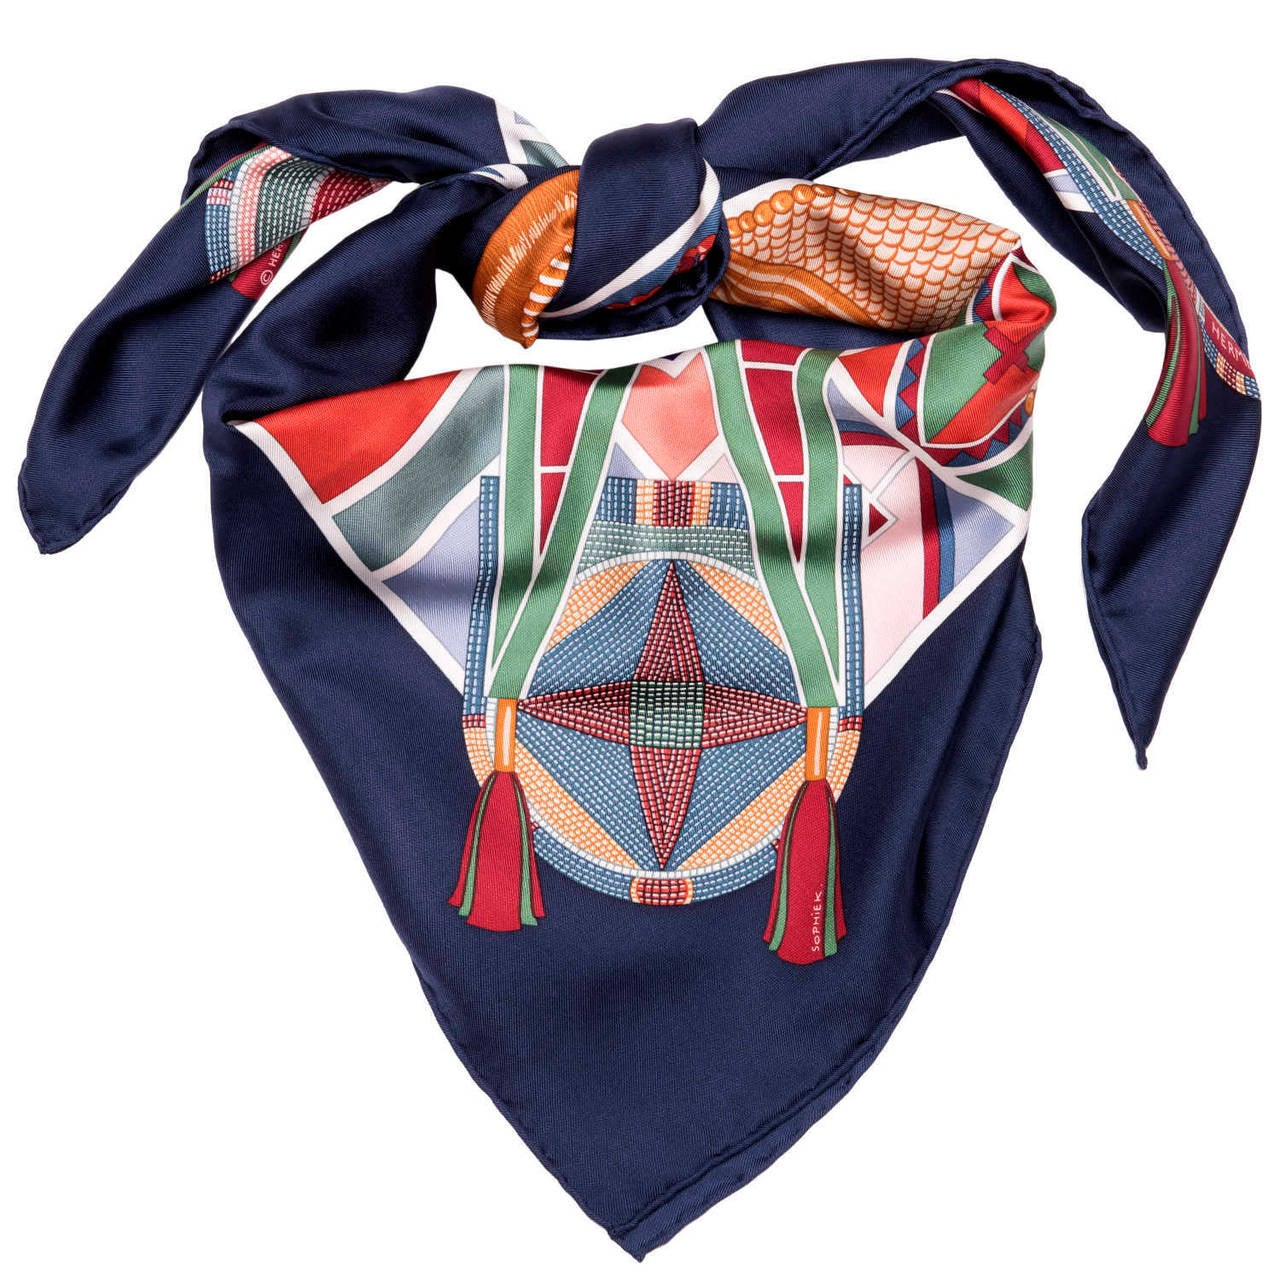  This Fabulous Hermes Silk scarf is in pristine 'strode-fresh' condition. 'L'Art Indien des Plaines', with it's strong American Indian History themes, was designed by Sophie Koechlin in 2004. With it's black border and multi-coloured ground, its a